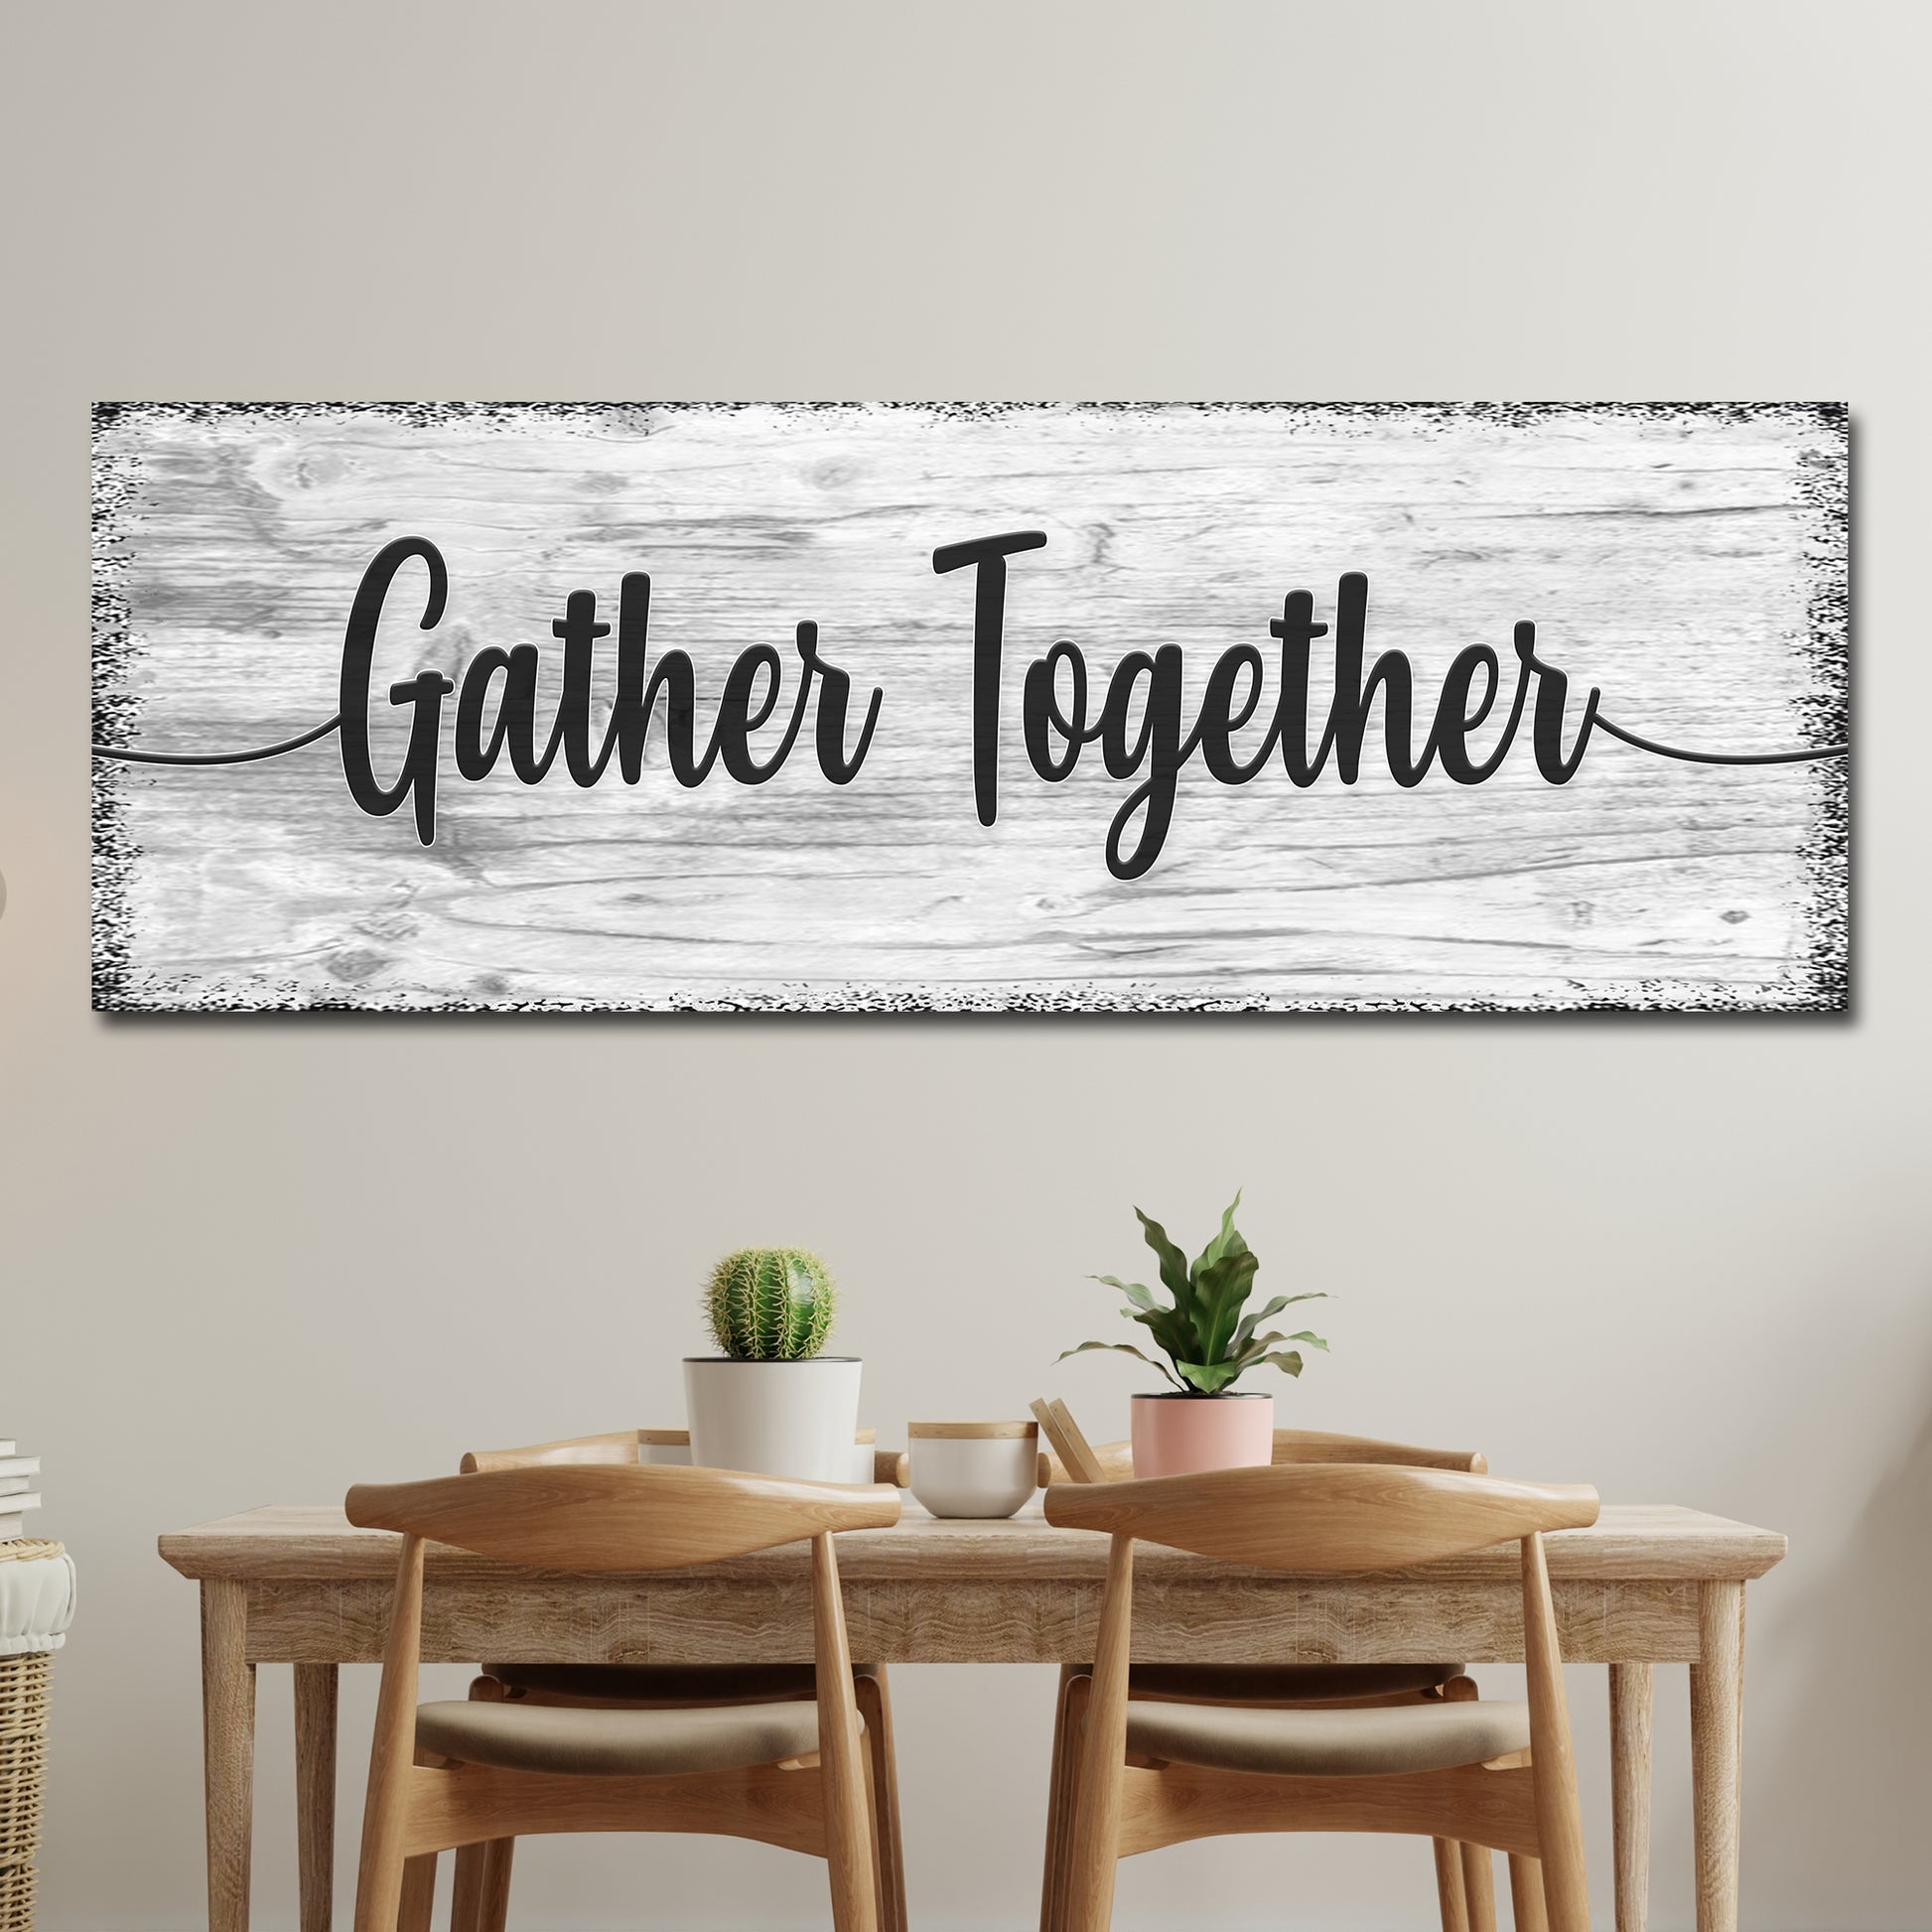 Gather Together Sign  - Image by Tailored Canvases